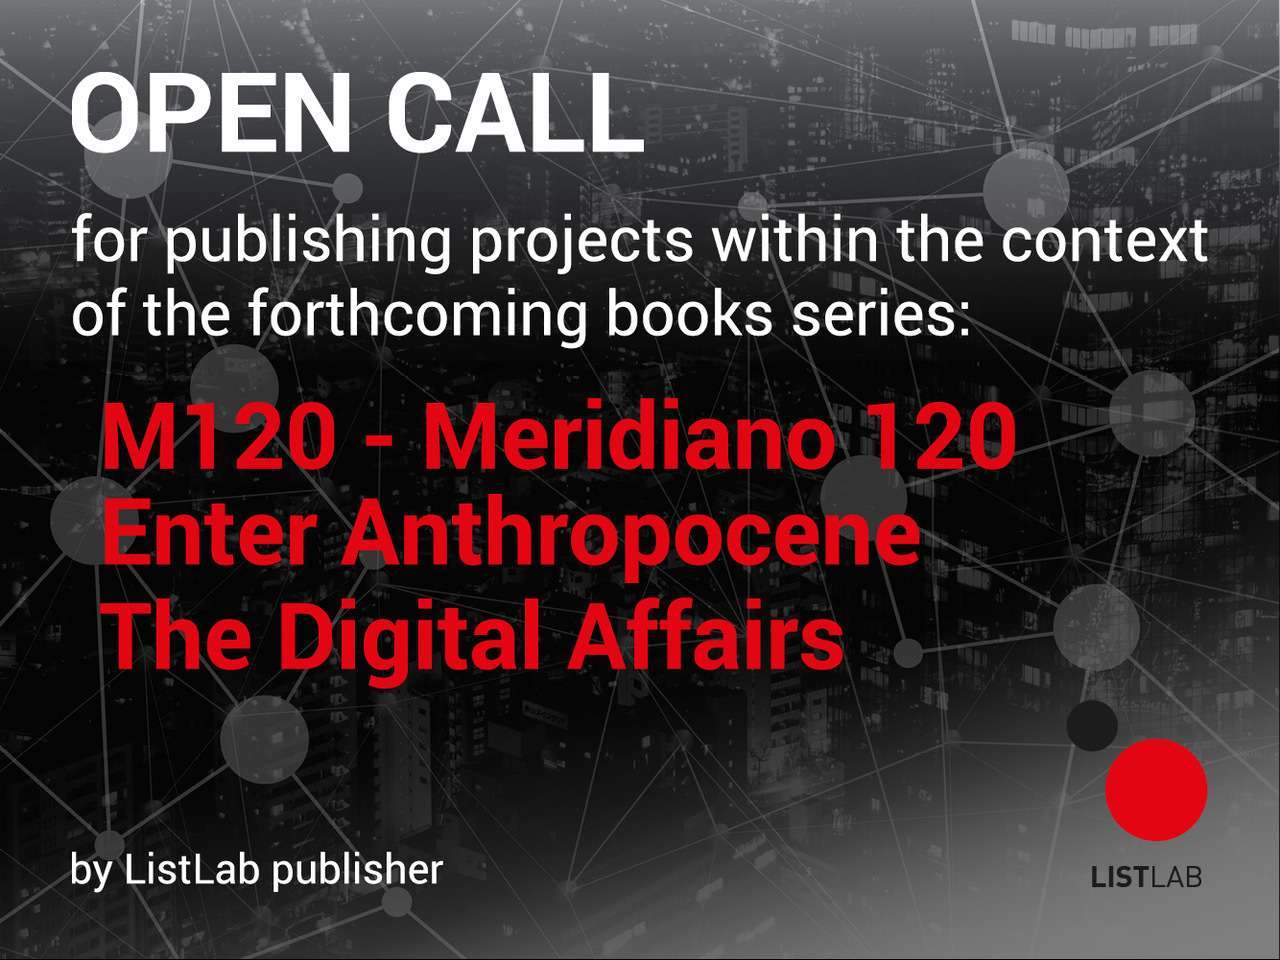 A new ListLab!  – Open Call for publishing projects within the context of the forthcoming books series’ M120 – Meridiano 120,’ ‘Enter Anthropocene,’ and ‘The Digital Affairs’ by ListLab publisher